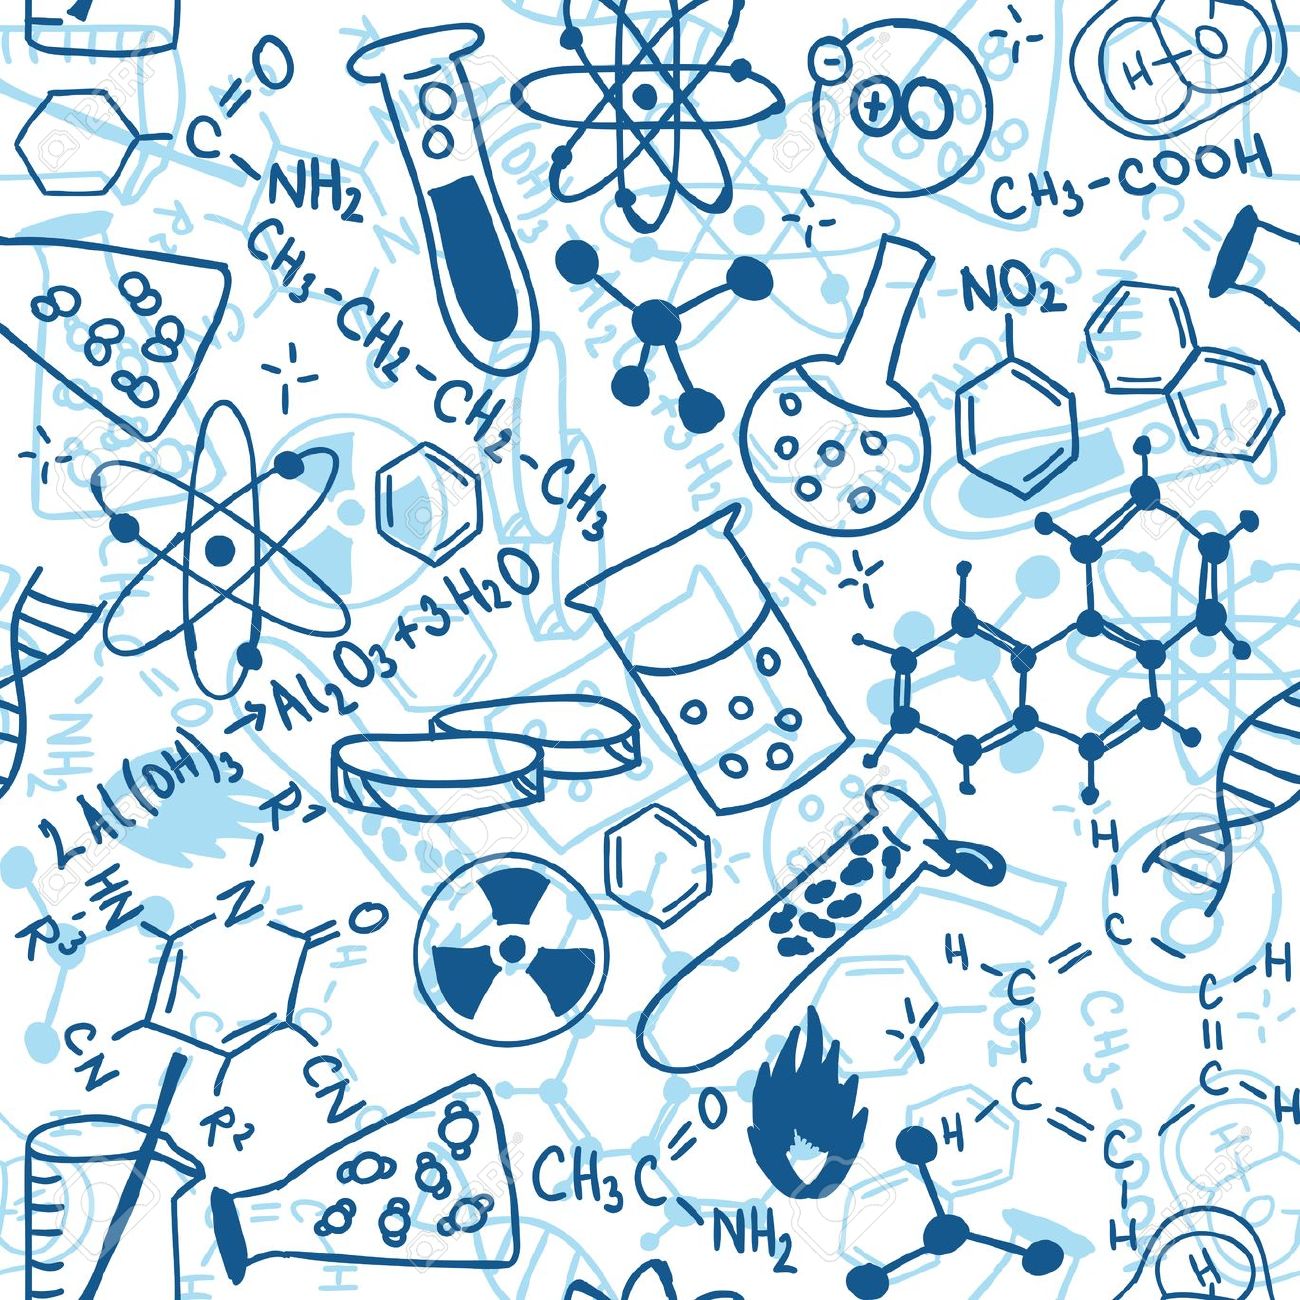 17526820-Seamless-pattern-background-illustration-of-science-drawings-doodle-style-Stock-Vector.jpg